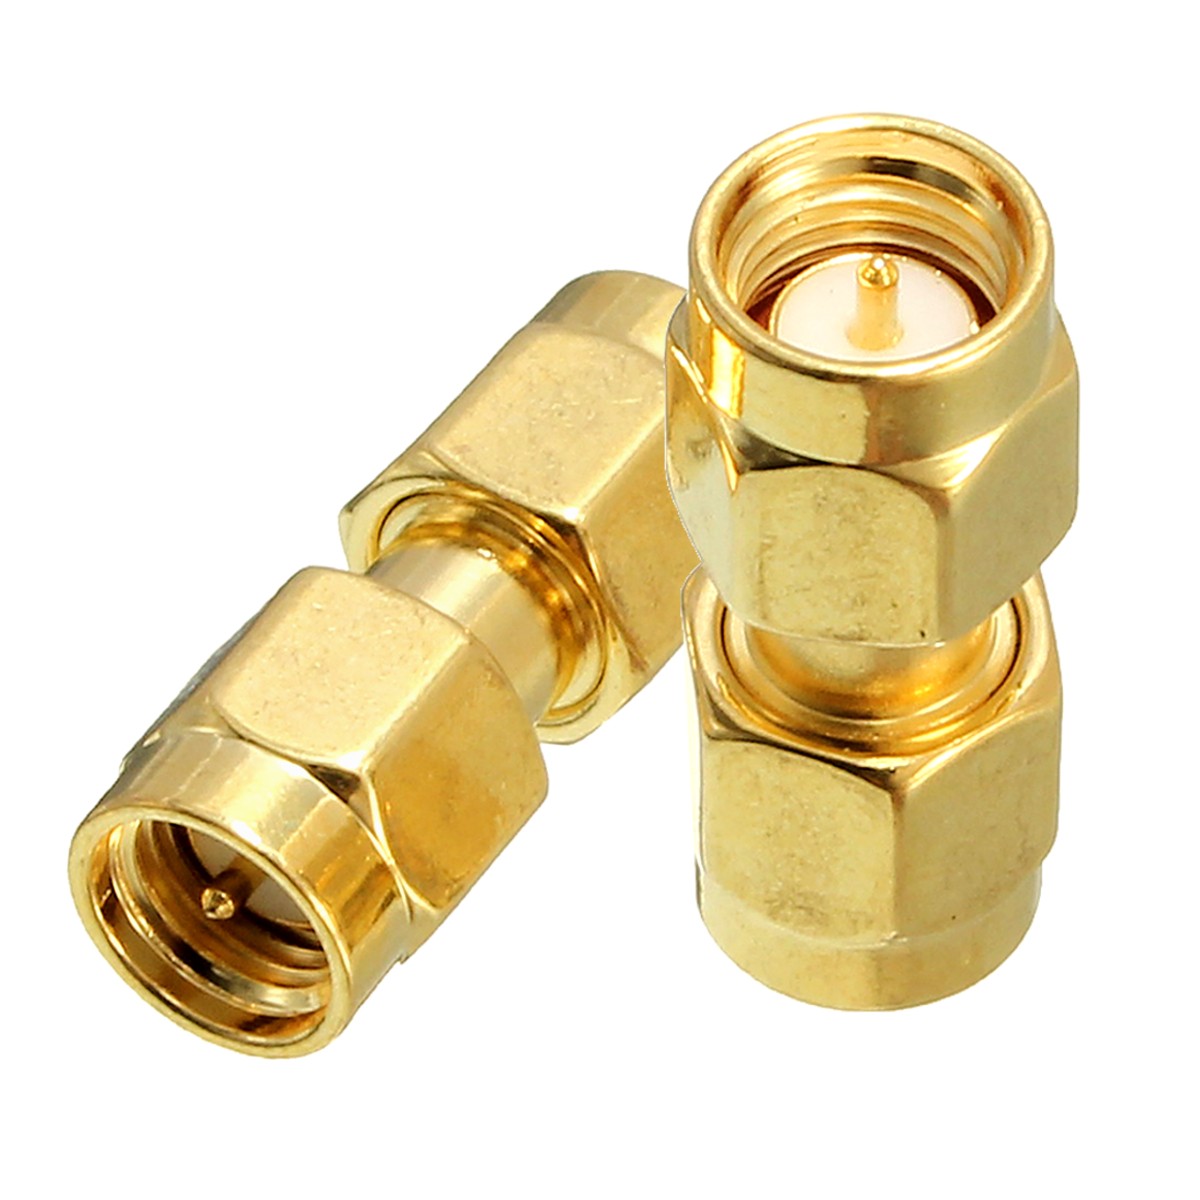 Excellwayreg-CA01-2Pcs-Copper-SMA-Male-To-SMA-Male-Plug-RF-Coaxial-Adapter-Connector-1073343-5